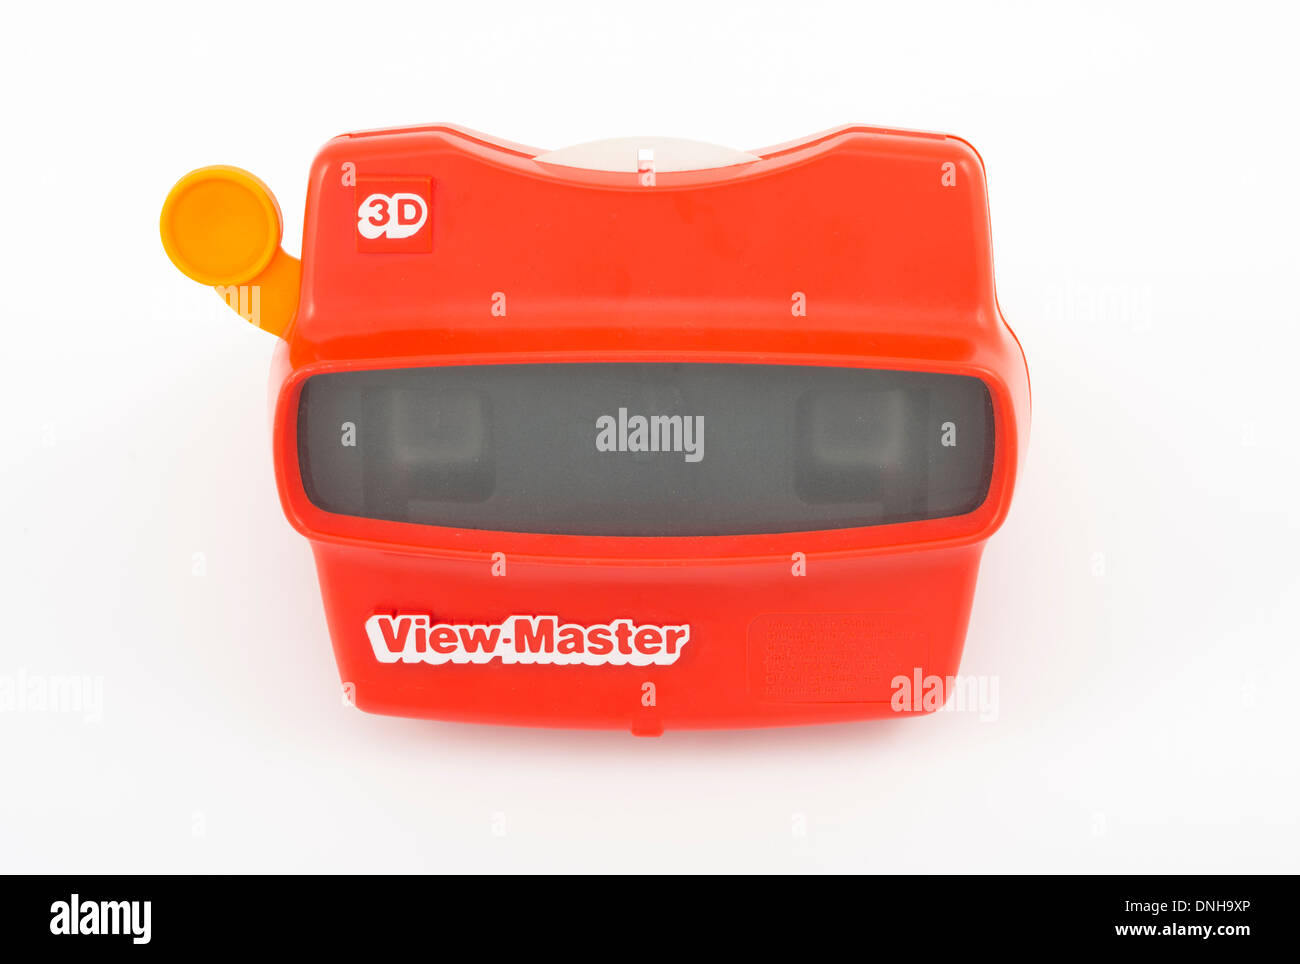 View-Master stereoscopic 3-D viewer Stock Photo - Alamy